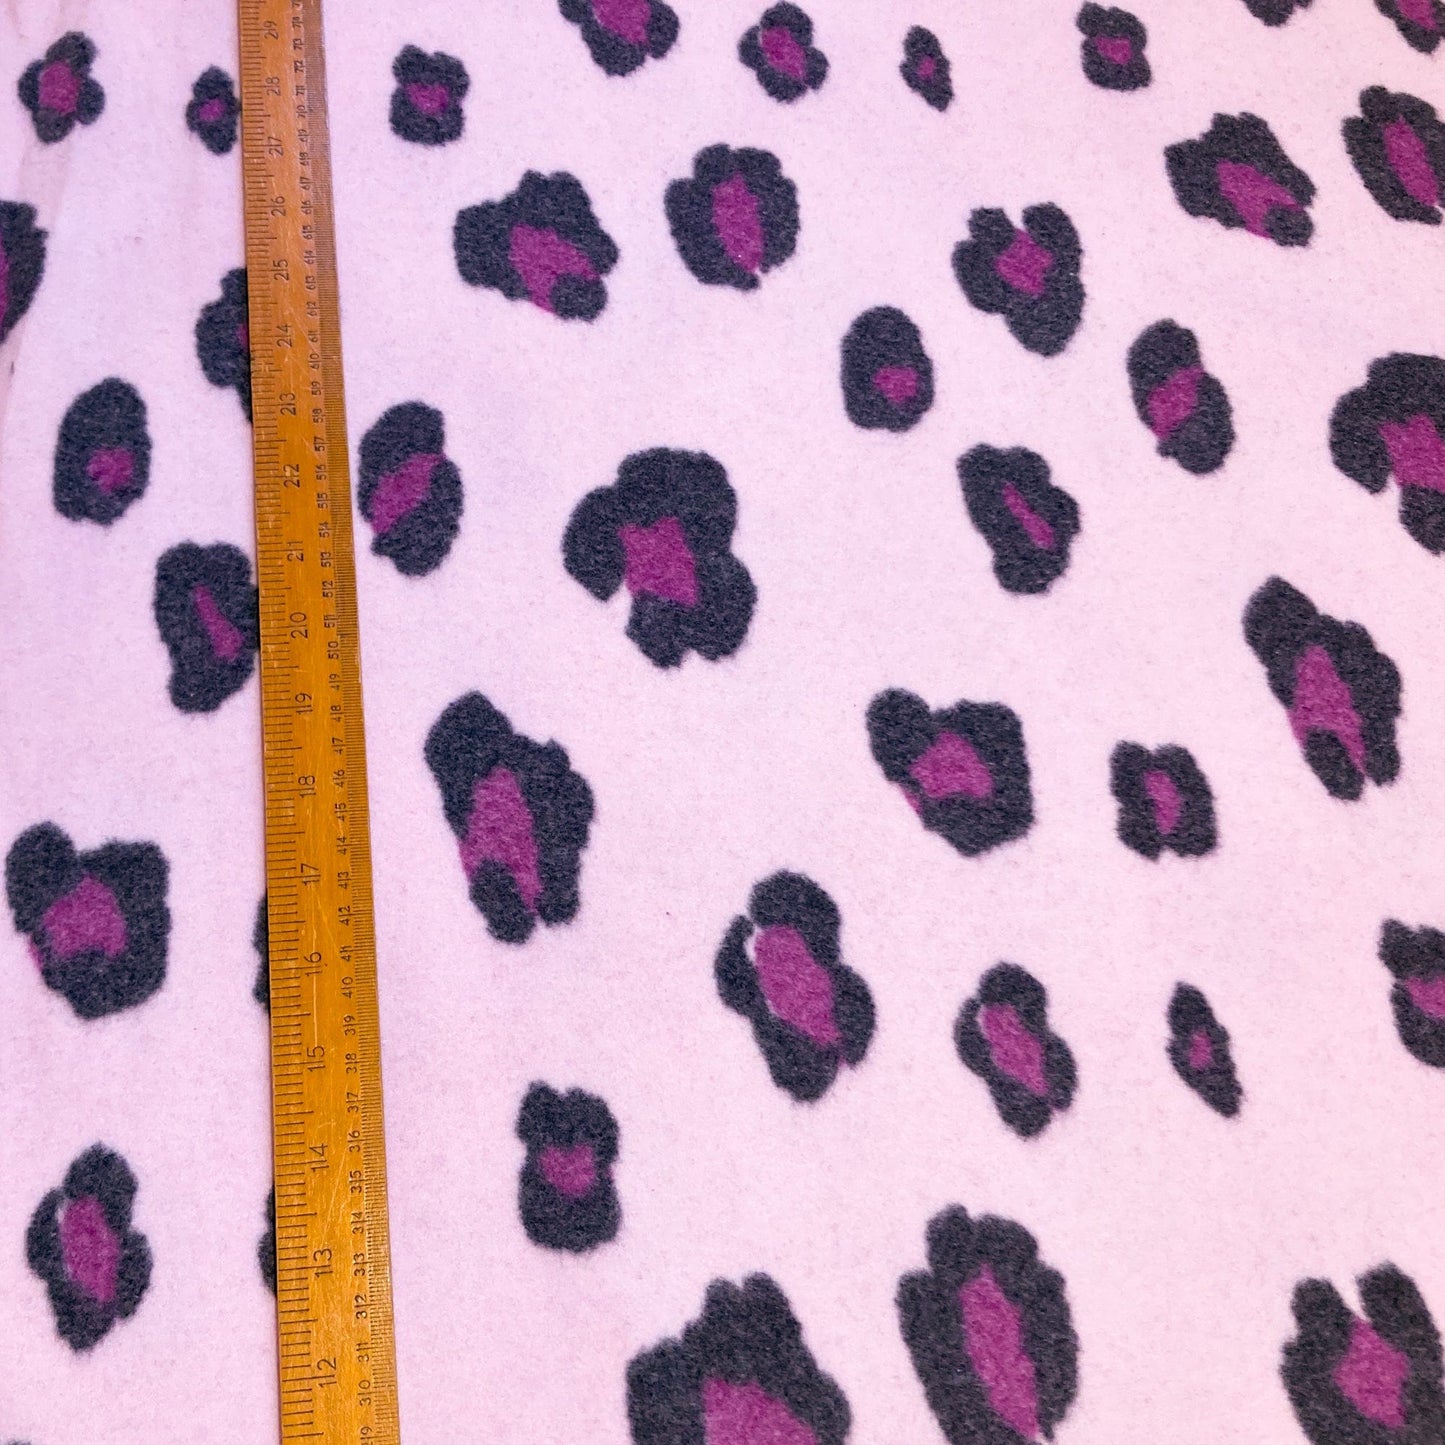 Organic Cotton Fleece with Snow Leopard Print in Pink